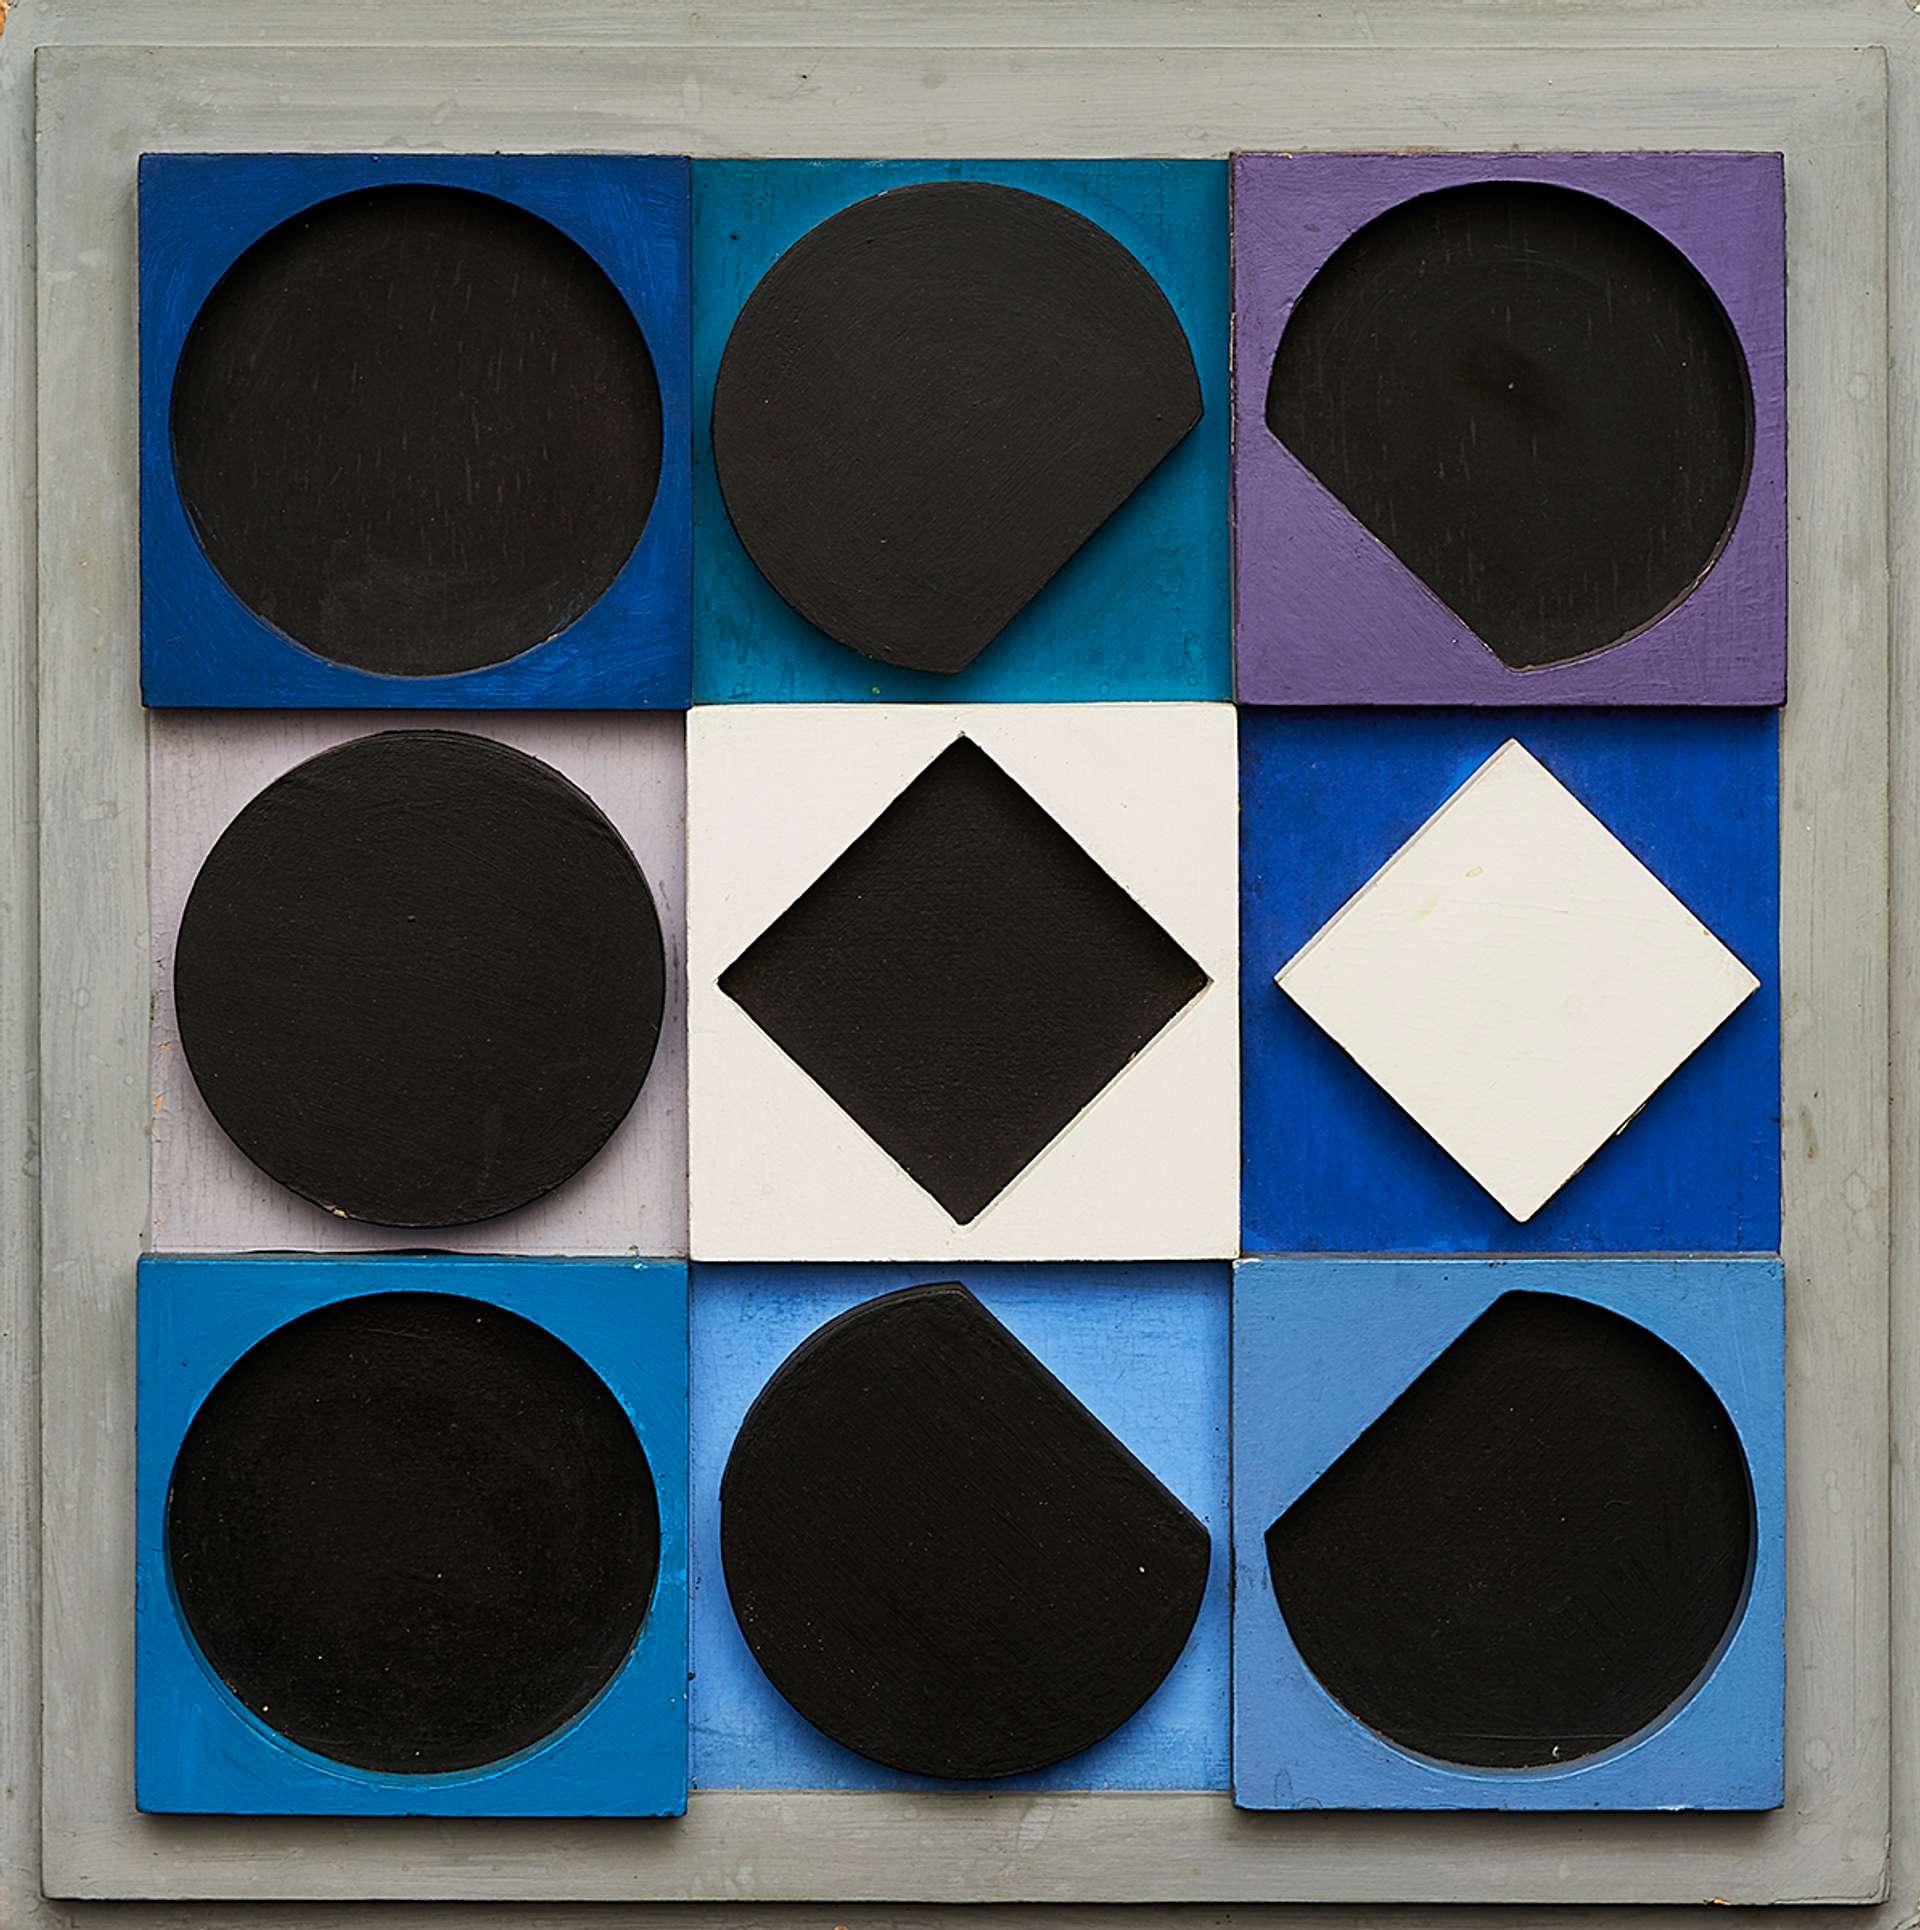 Topaze Noire Negatif by Victor Vasarely (1967). A wooden multiple relief artwork, featuring circular shapes and squares on a grid, in blue, shades, purple, black and white.